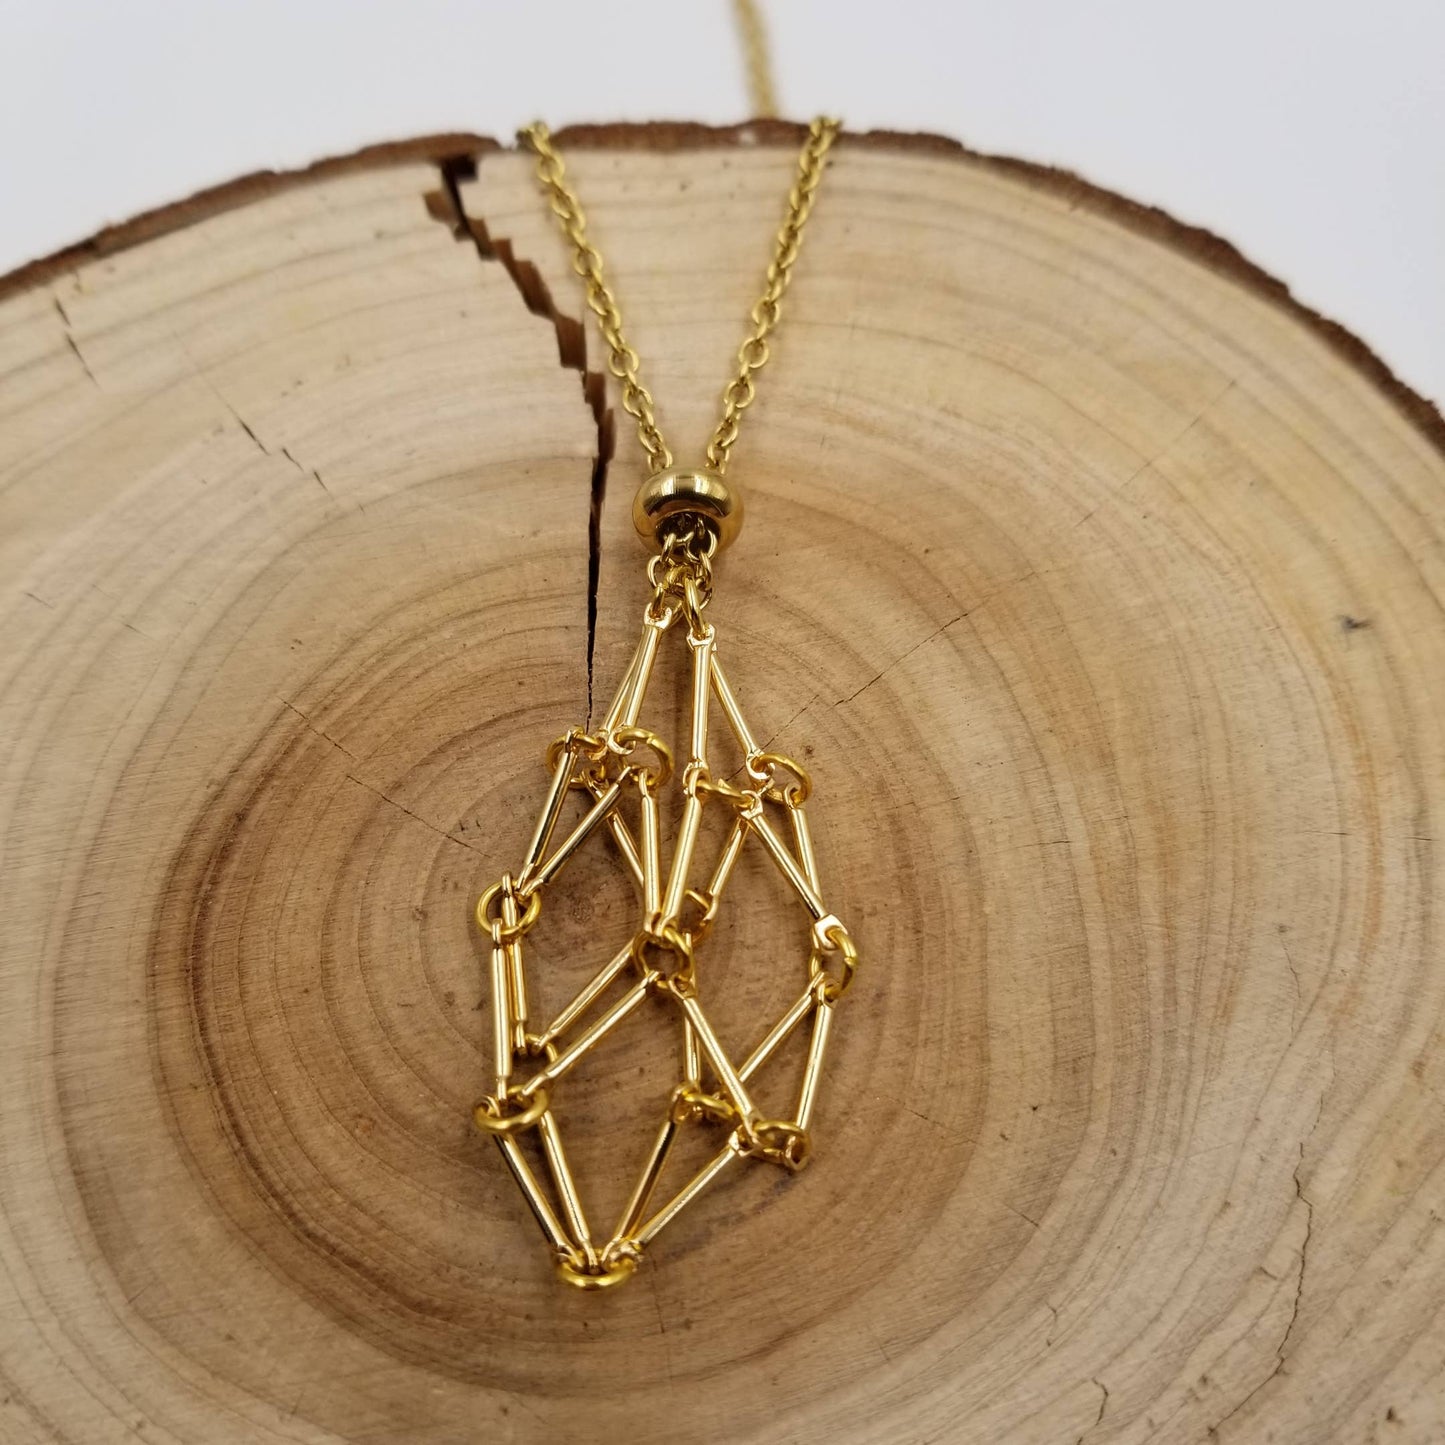 Gold Interchangeable Macramé Cage Necklaces Without Stone